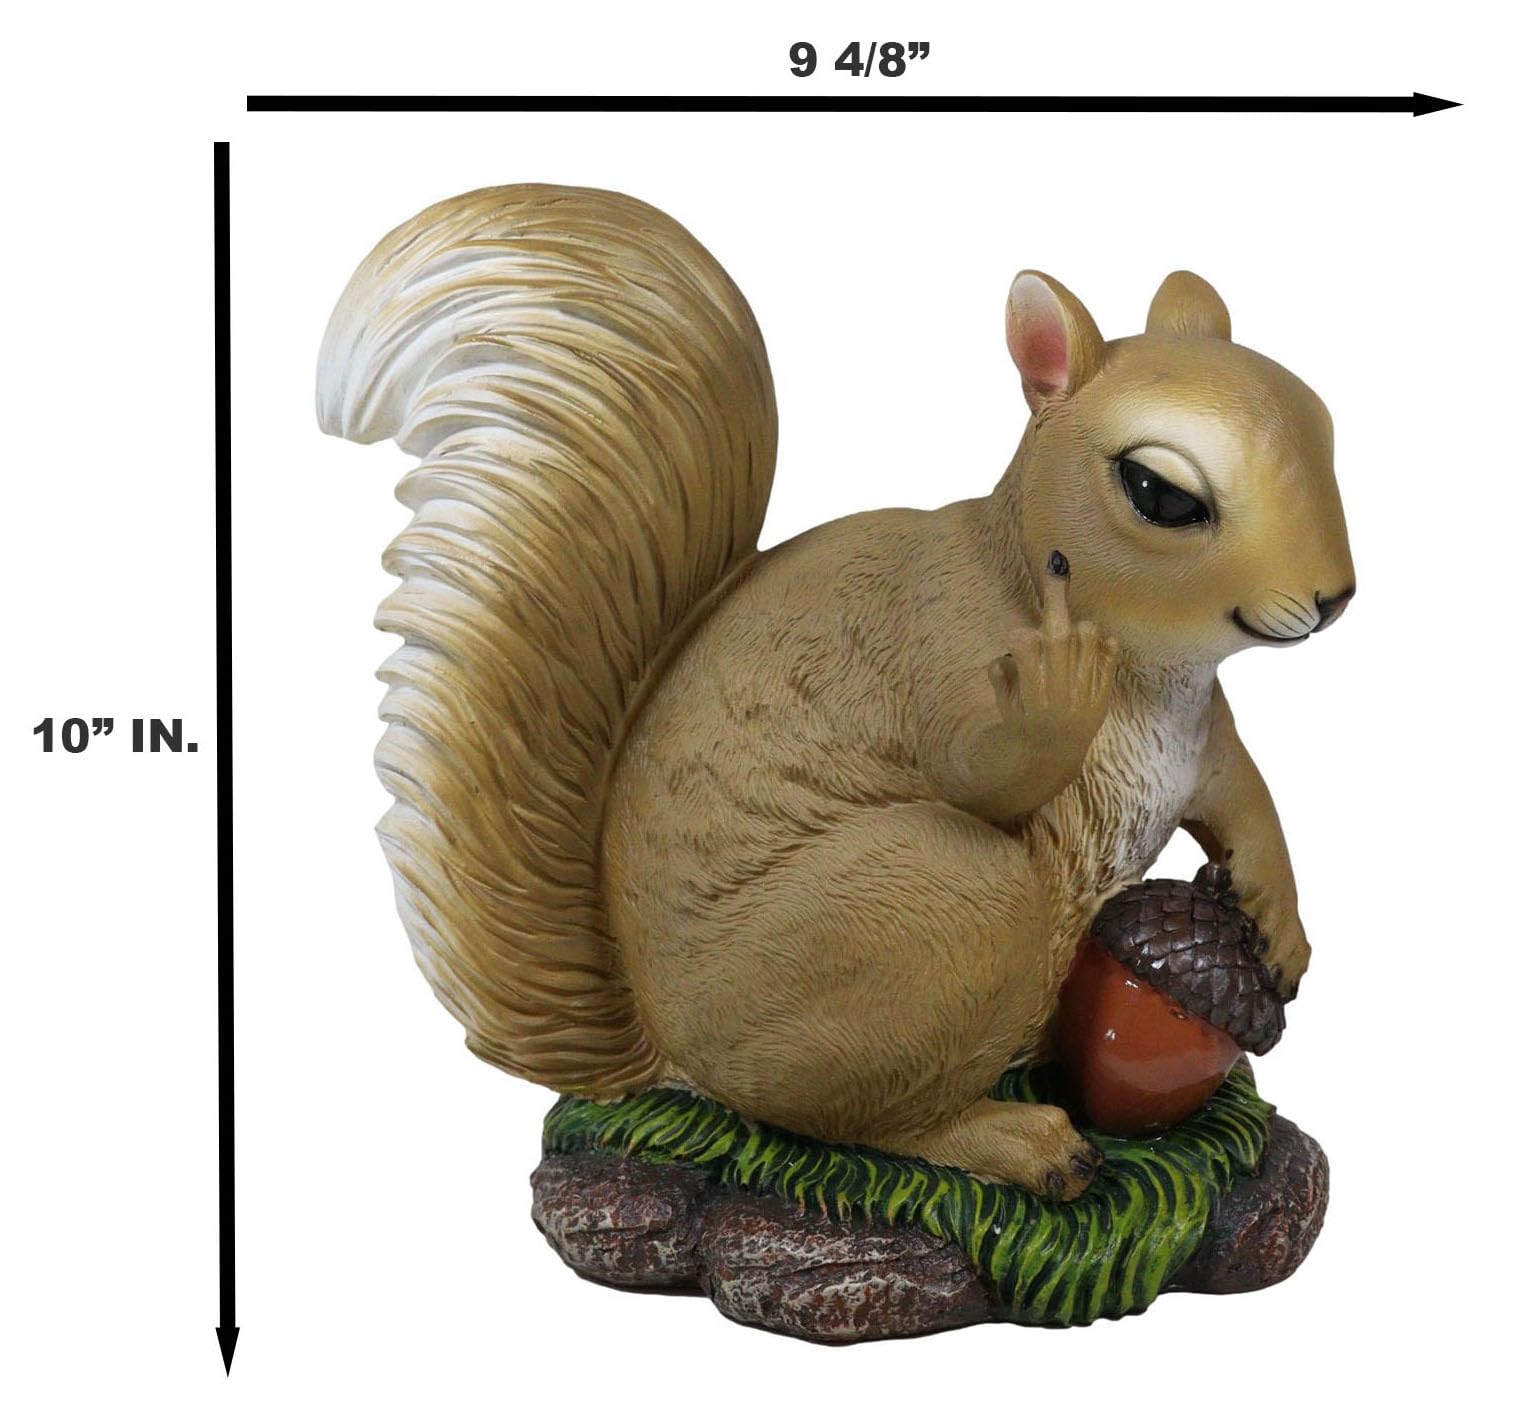 Ebros Gift Large Rude Squirrel Pointing Middle Finger with Acorn Nutty Welcome Guest Greeter Statue 10" Tall Whimsical Woodlands Funny Animal Squirrels Chipmunks Flipping Off Home Decor Figurine